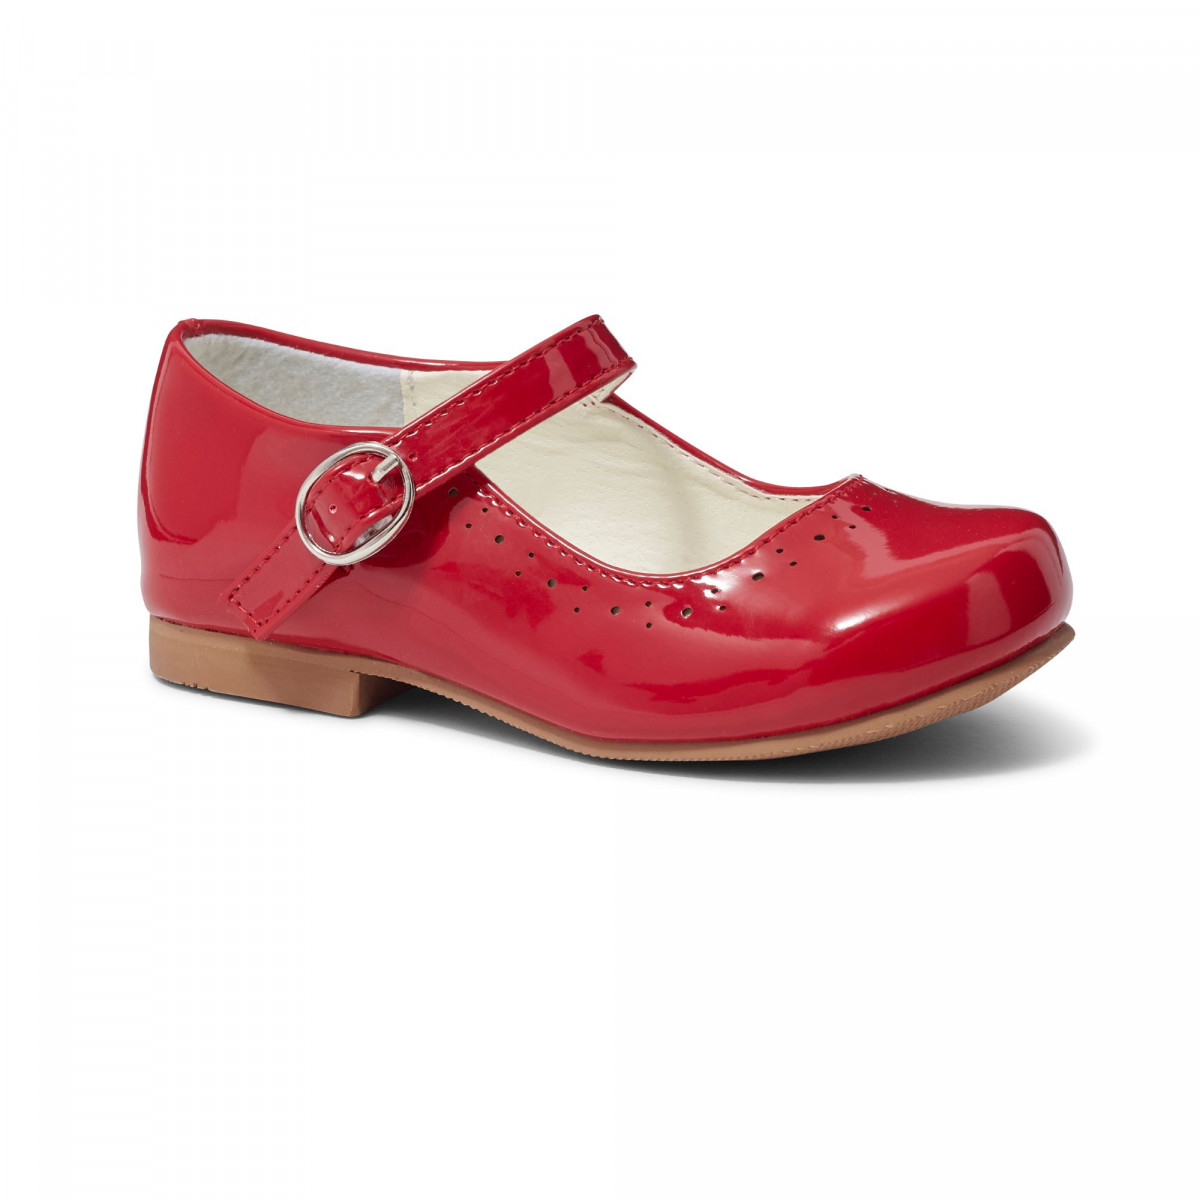 Girls Mary Jane Style Shoes by Sevva 